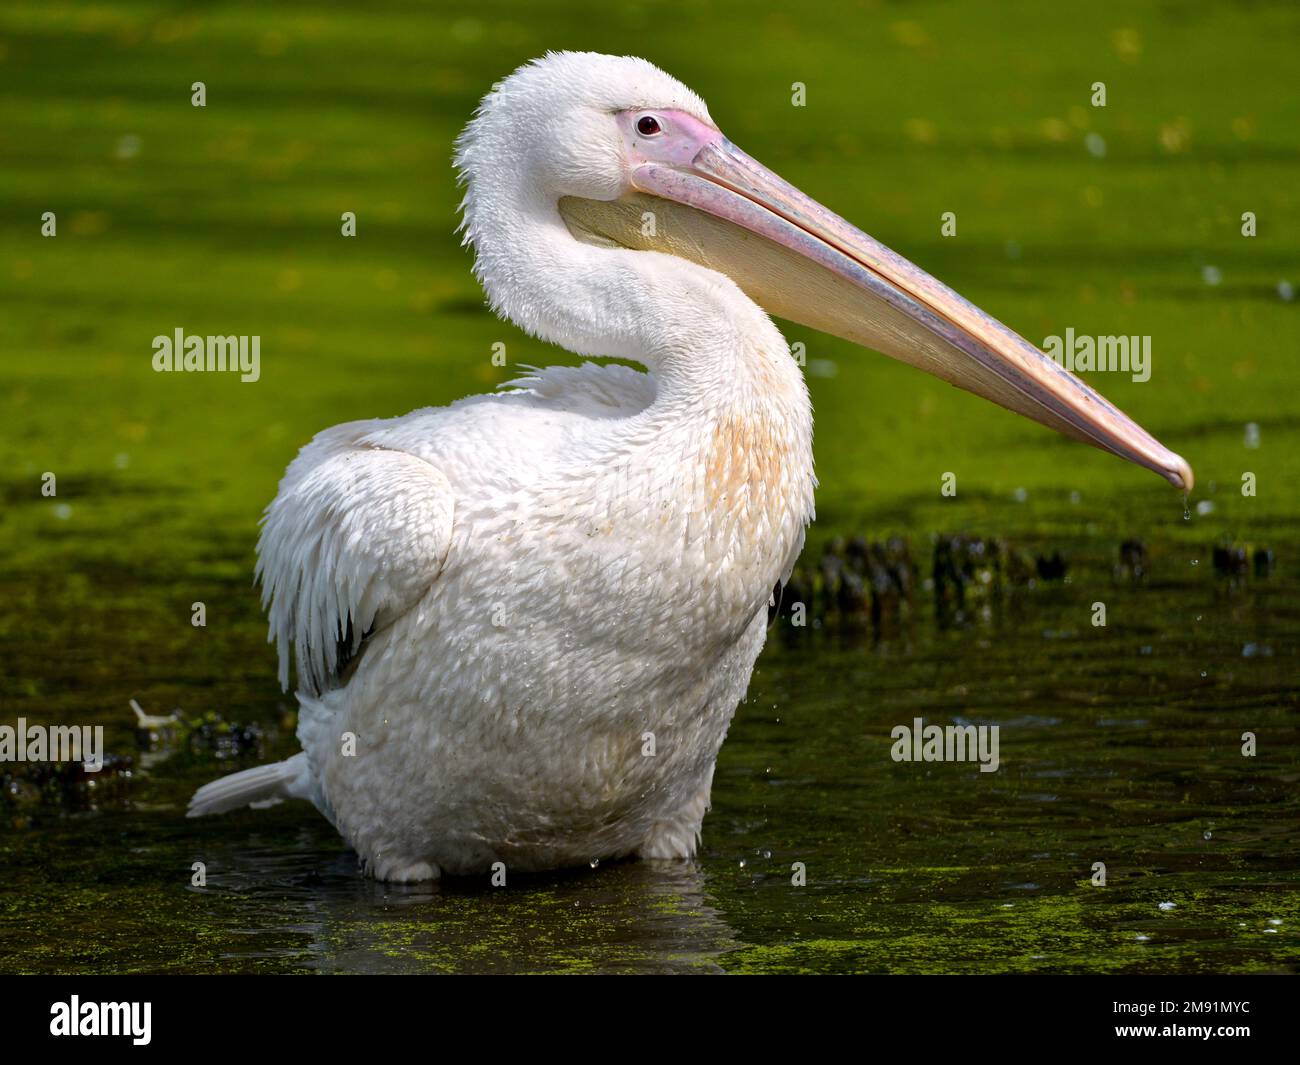 White pelican (Pelecanus onocrotalus) standing in water among duckweed and seen from profile Stock Photo